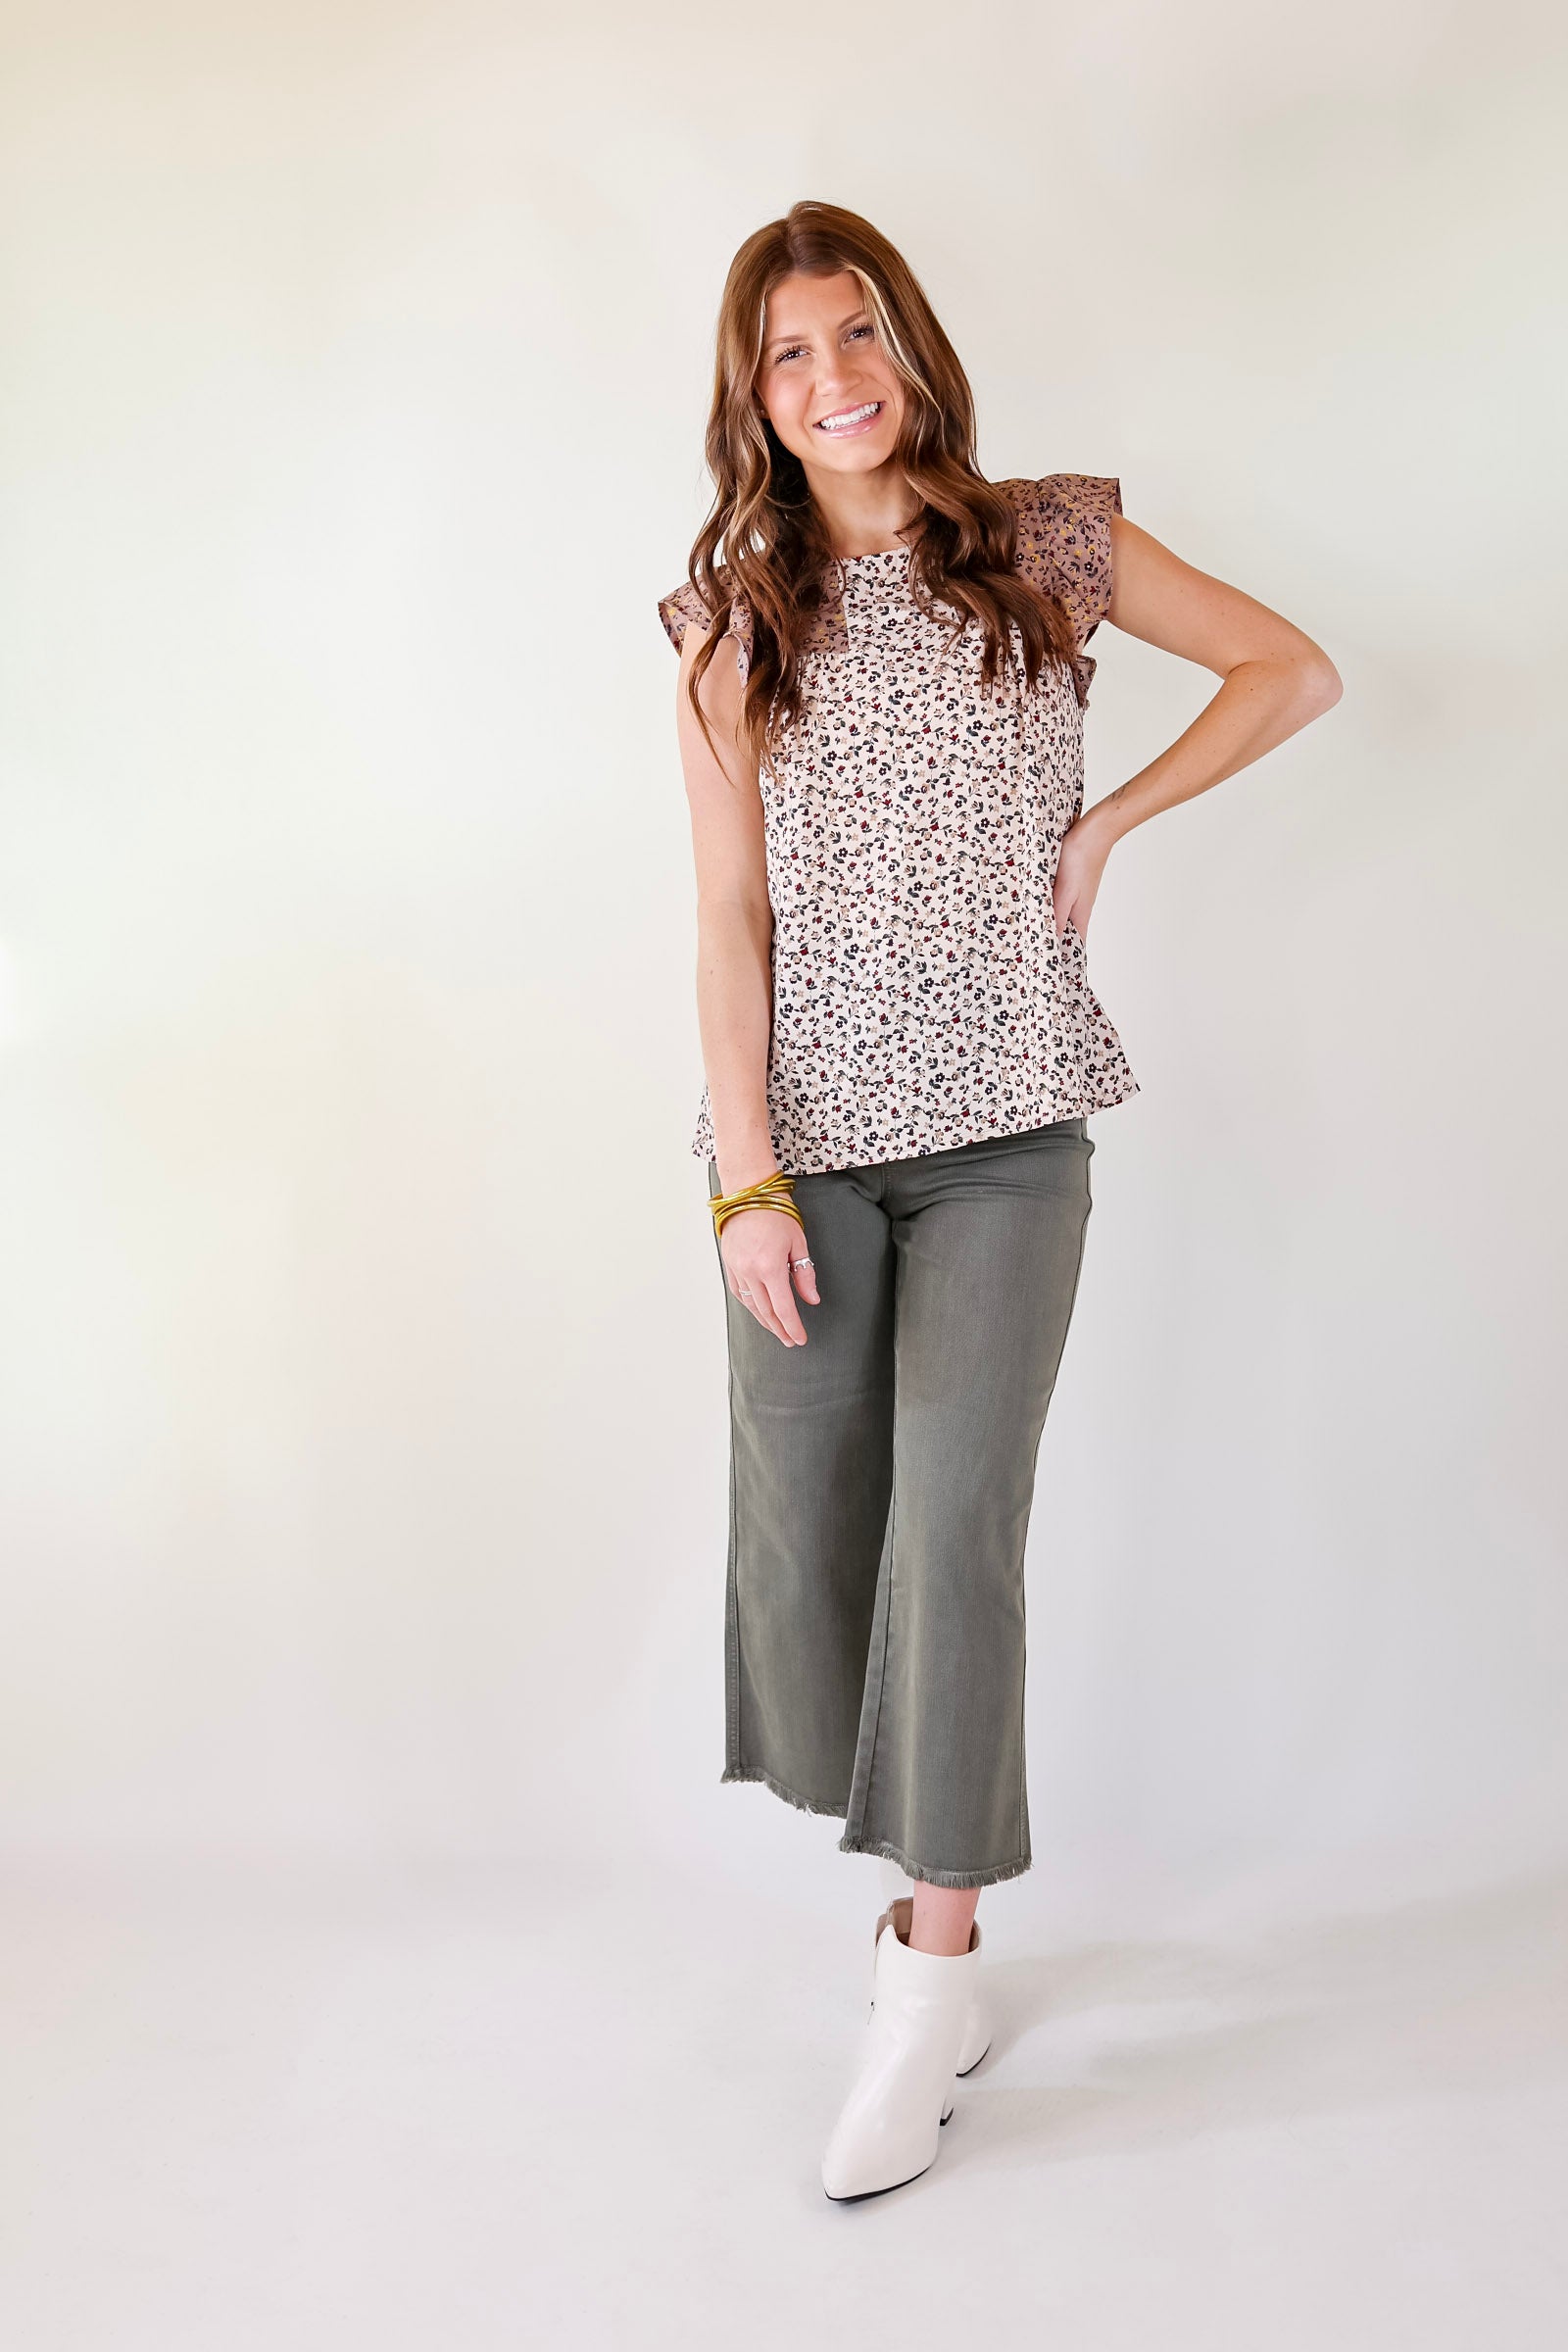 Stick Around Floral Print Top with Ruffle Cap Sleeves in Beige Mix - Giddy Up Glamour Boutique